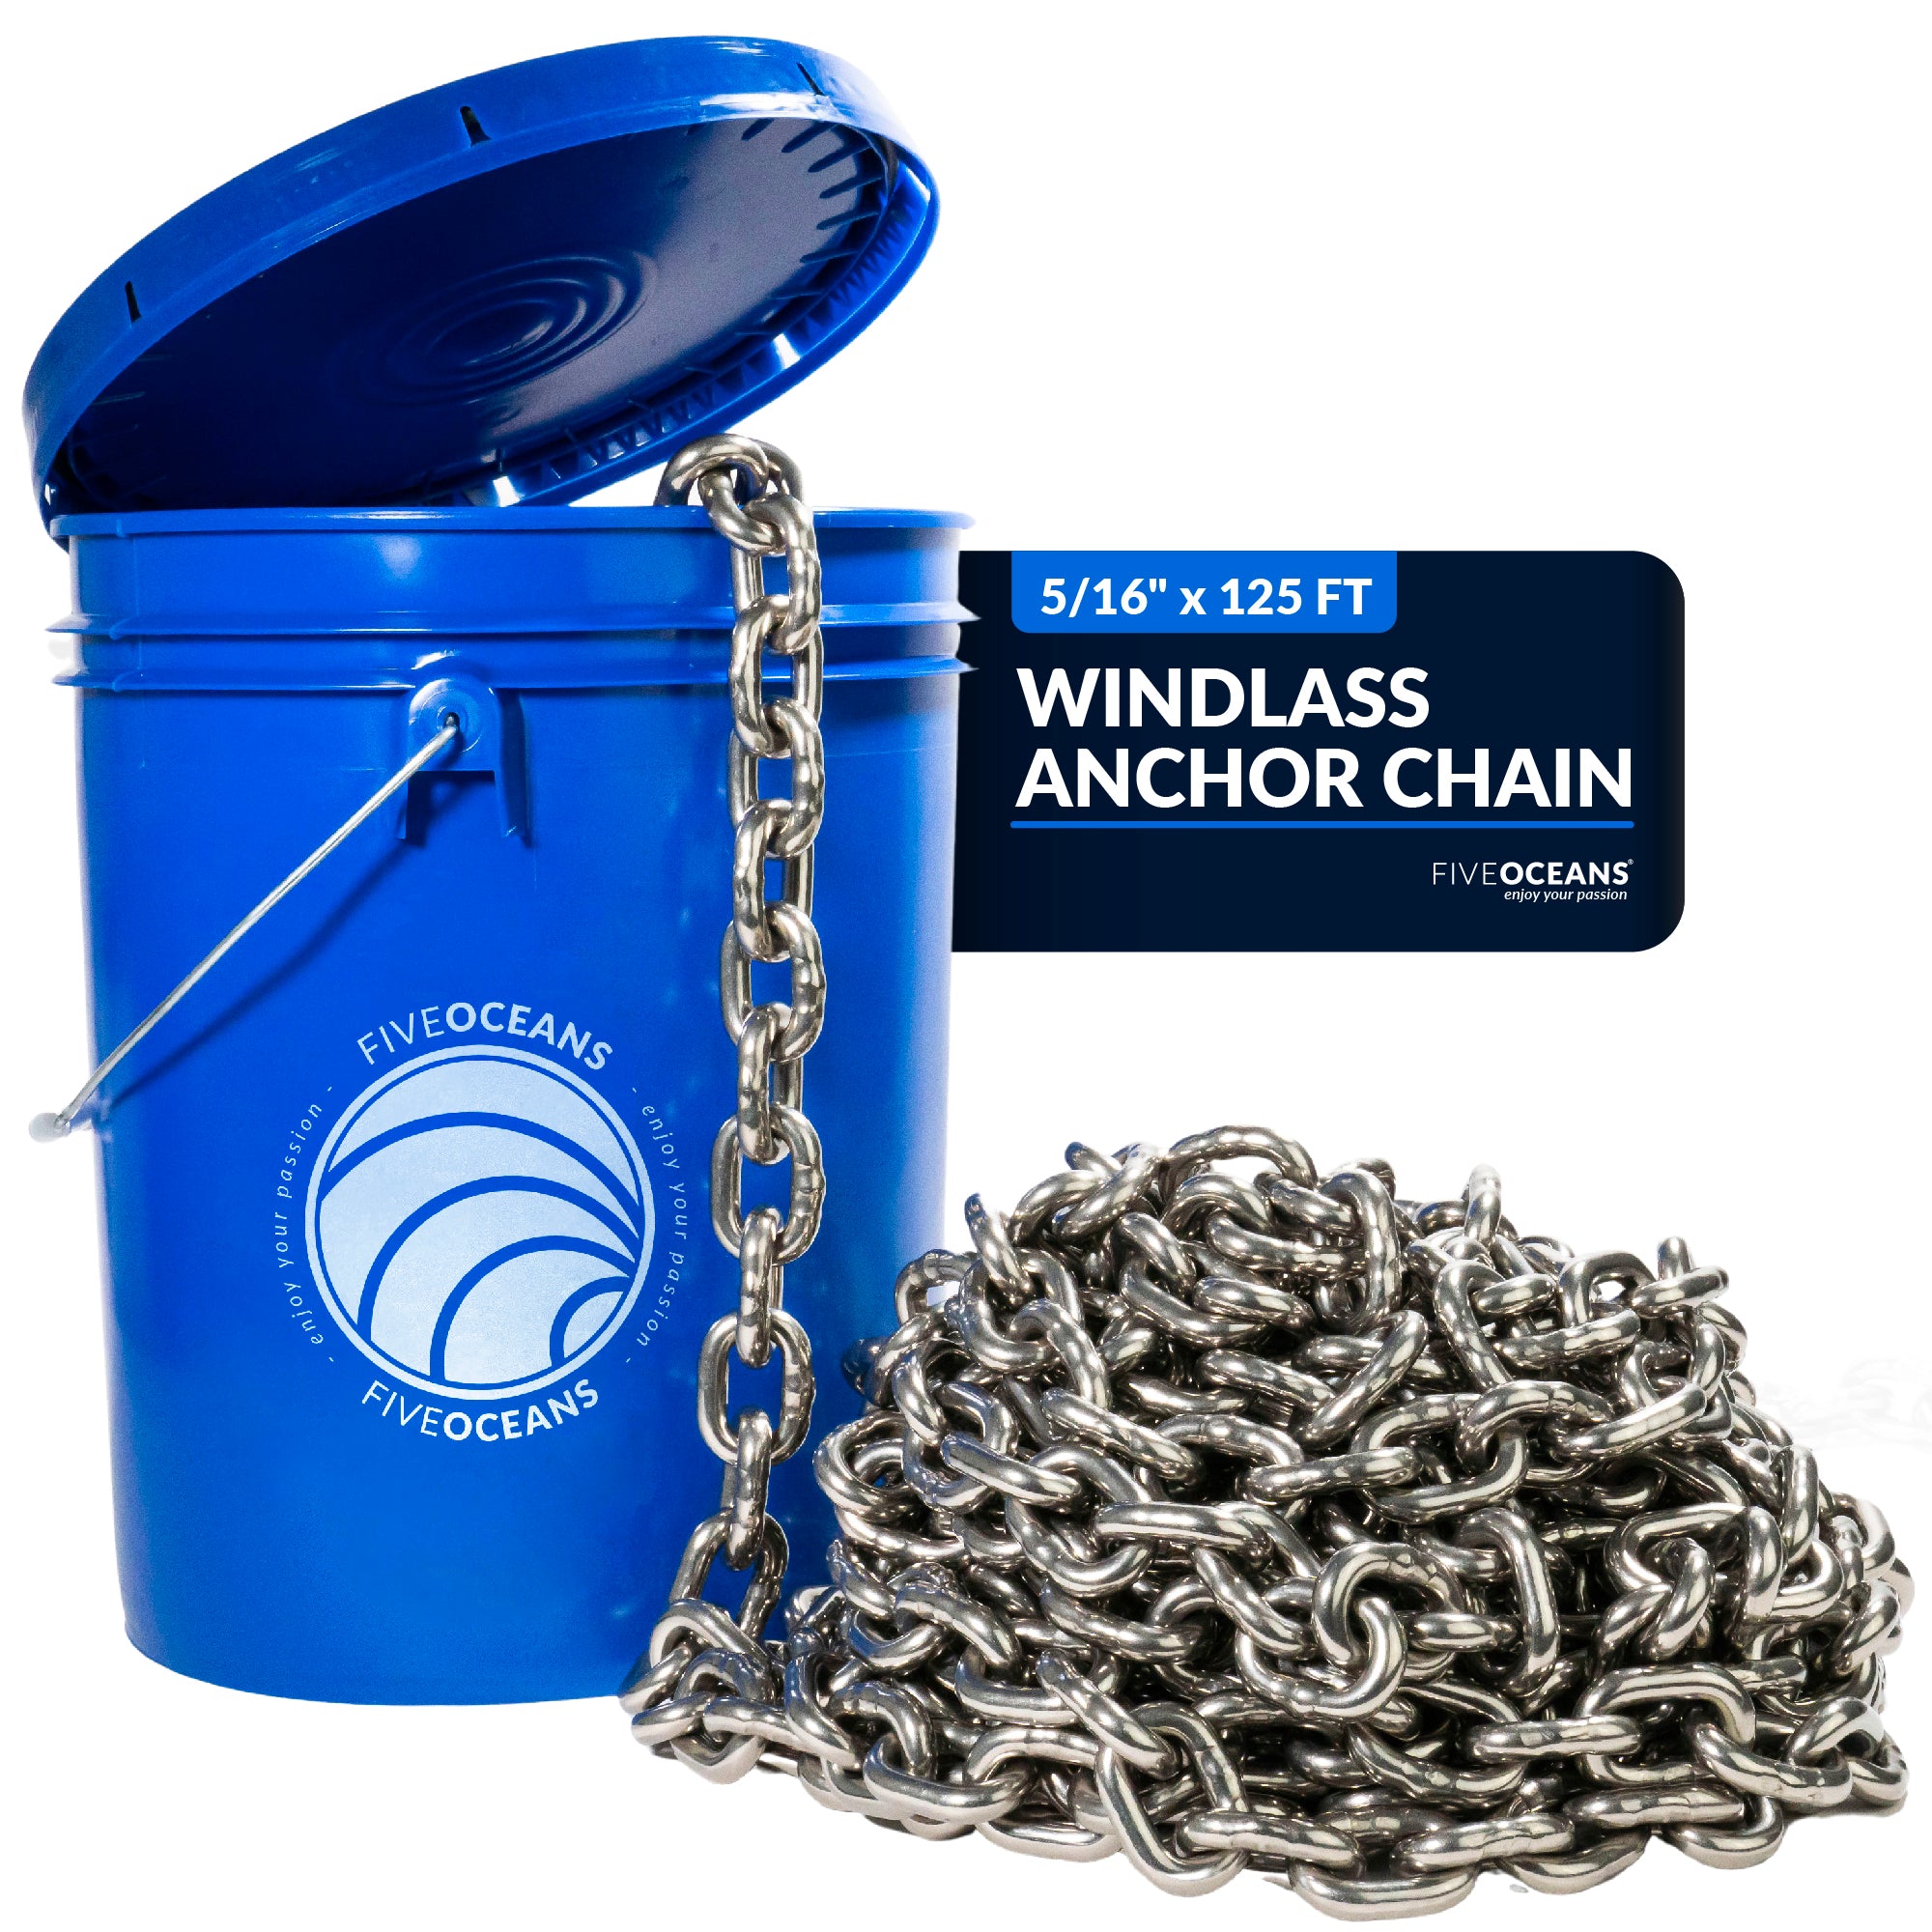 5/16" x 125'  Boat Windlass Anchor Chain HT G4 Stainless Steel - FO4493-M125